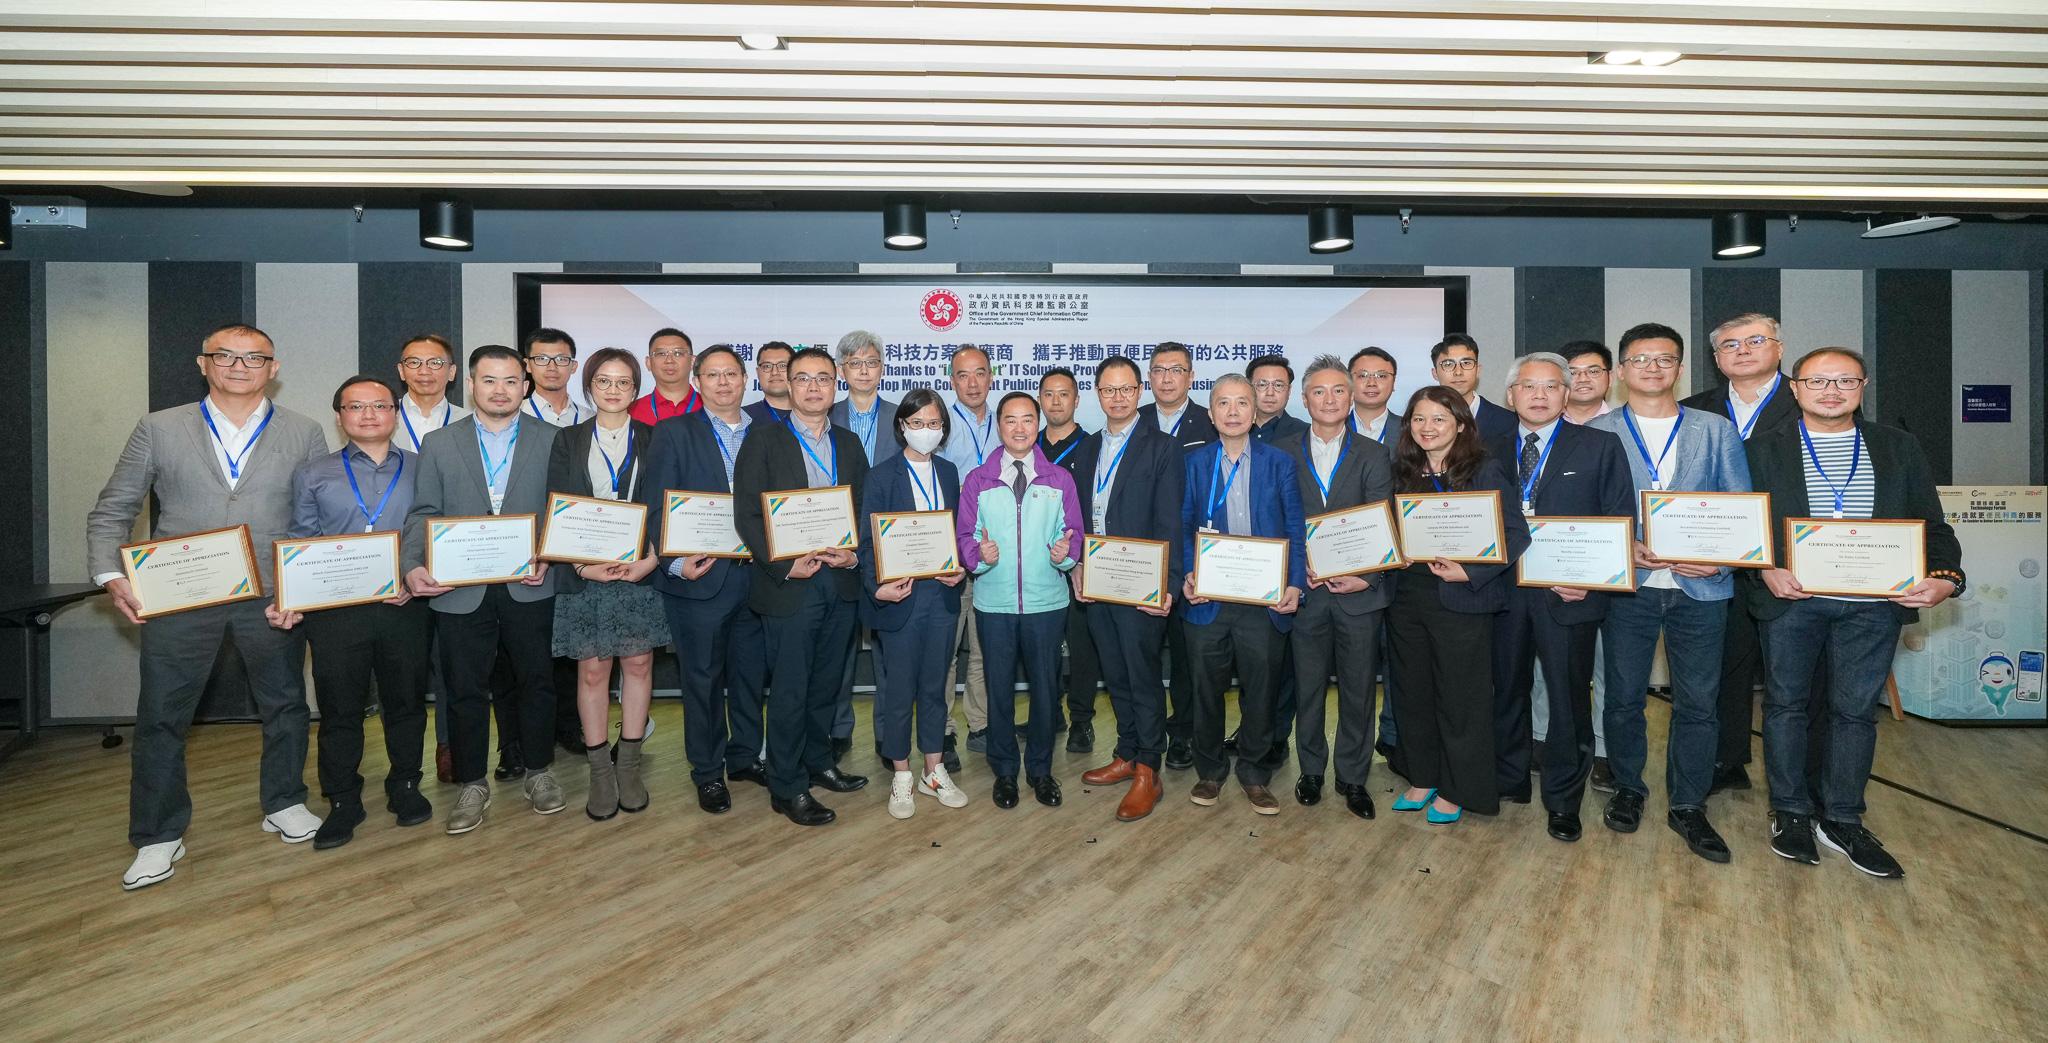 The Government Chief Information Officer, Mr Tony Wong (front row, centre), presents the certificate of appreciation to the "iAM Smart" IT solutions providers and is pictured with them at the certificate of appreciation presentation ceremony for the "iAM Smart" IT Solution Providers today (October 13).